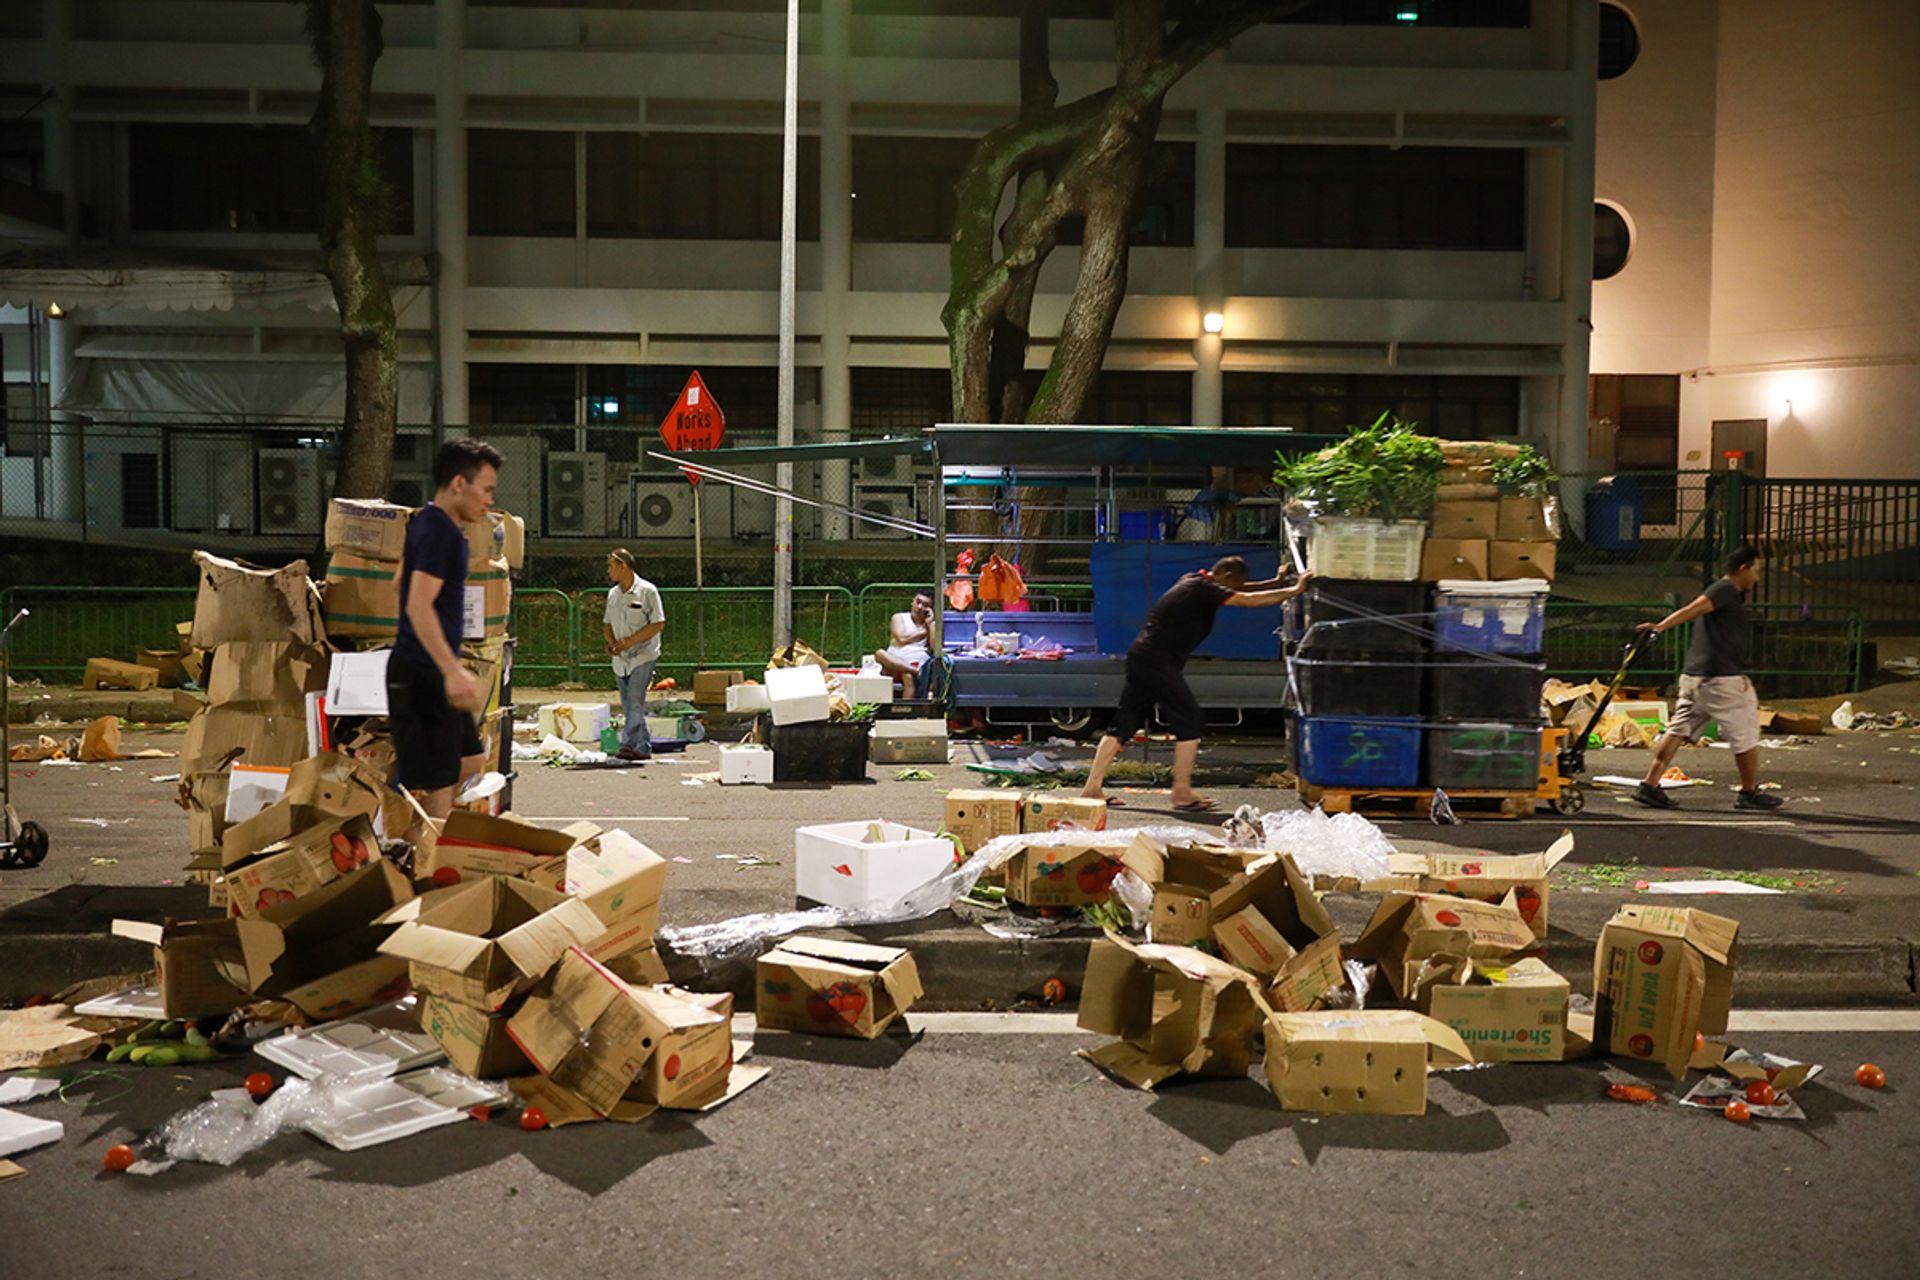 Workers packing the leftover greens into plastic cartons on May 6. Unsold vegetables are picked up by Willing Hearts, a local soup kitchen that prepares and distributes meals.